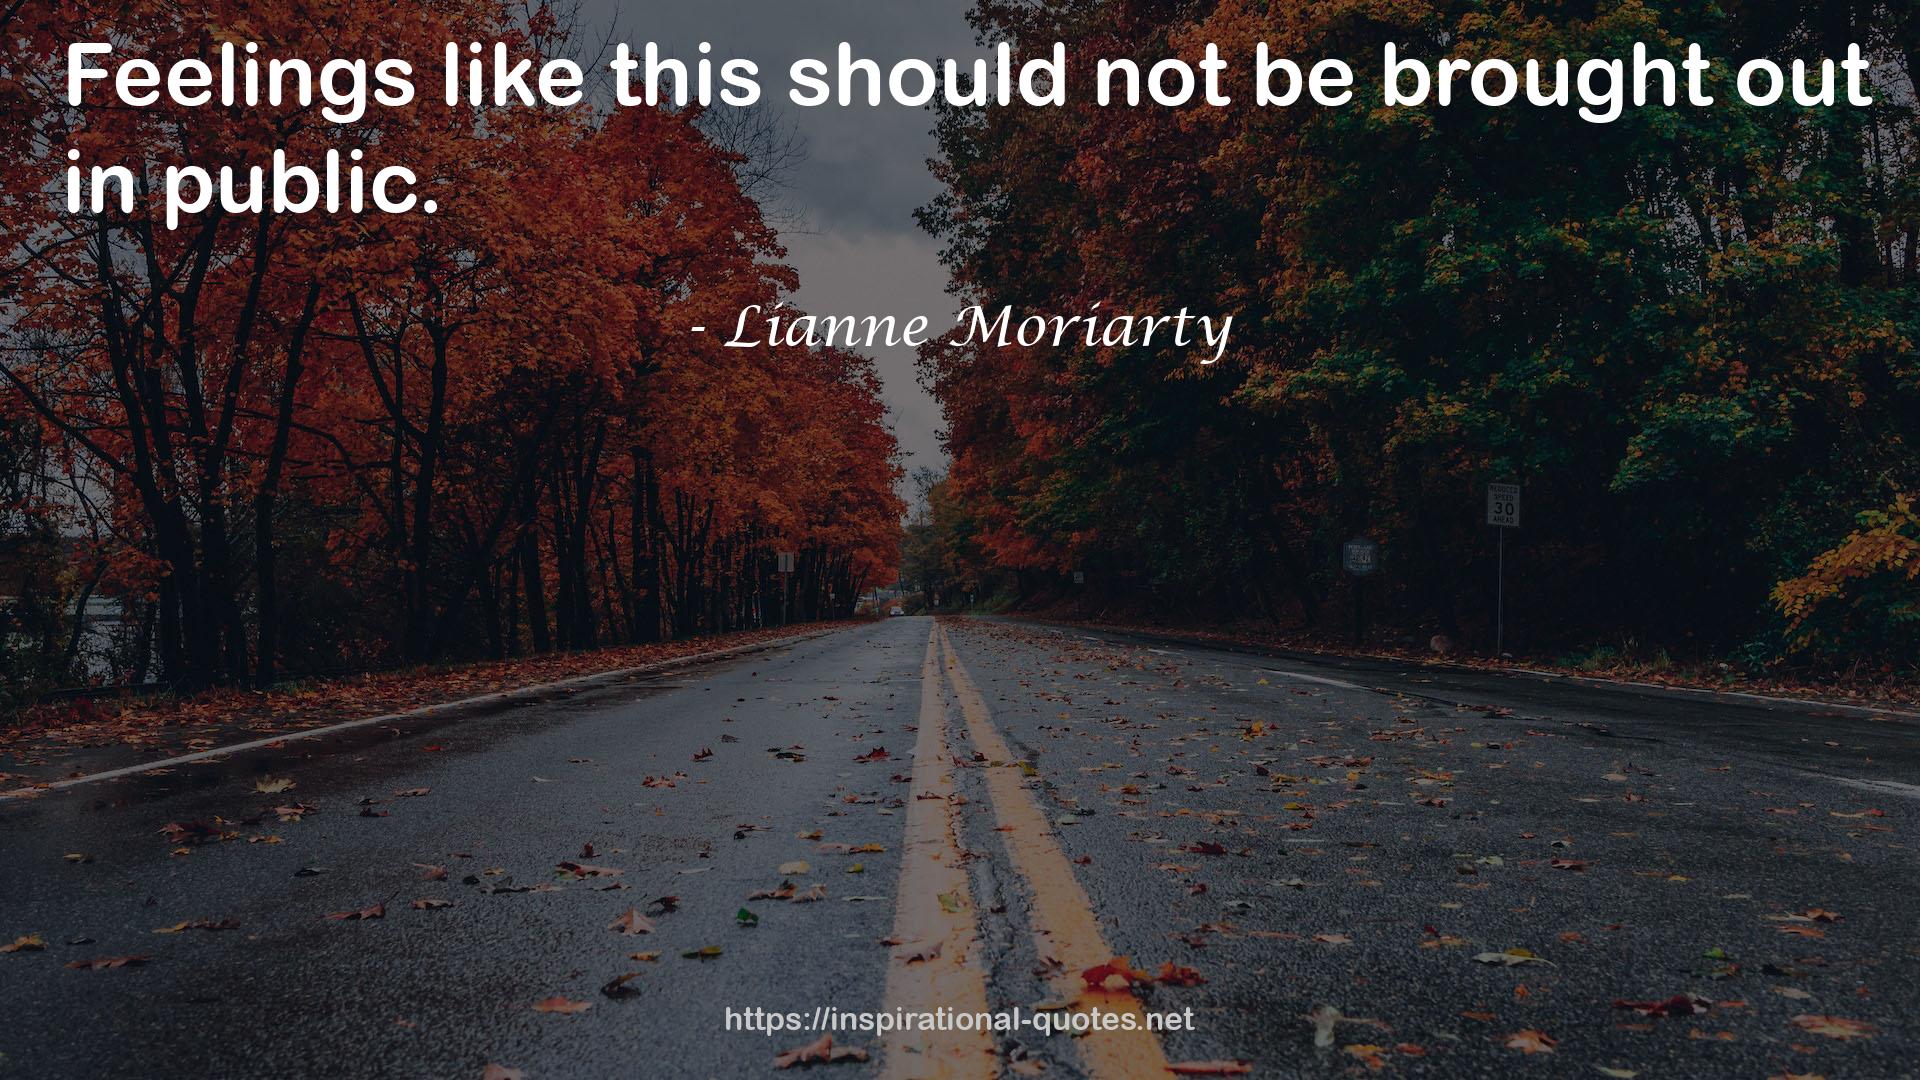 Lianne Moriarty QUOTES